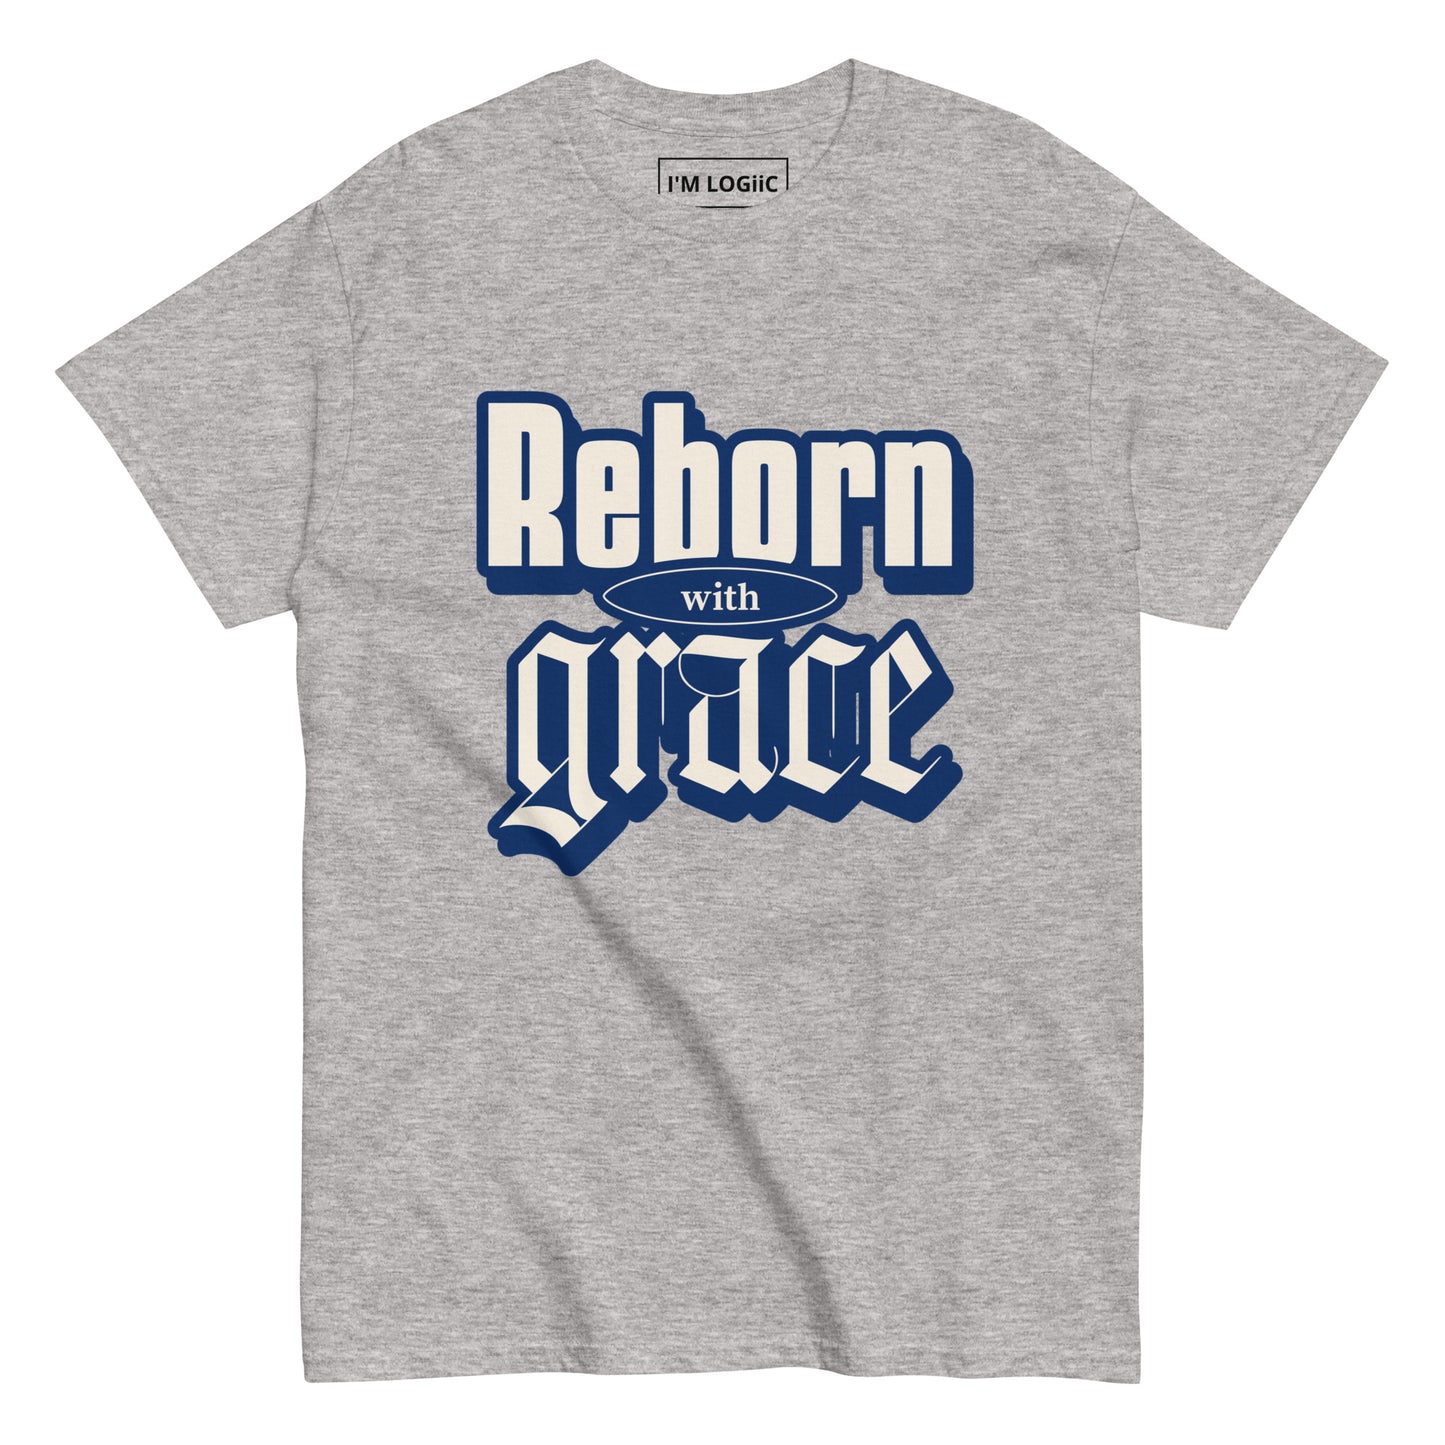 Reborn with Grace classic tee